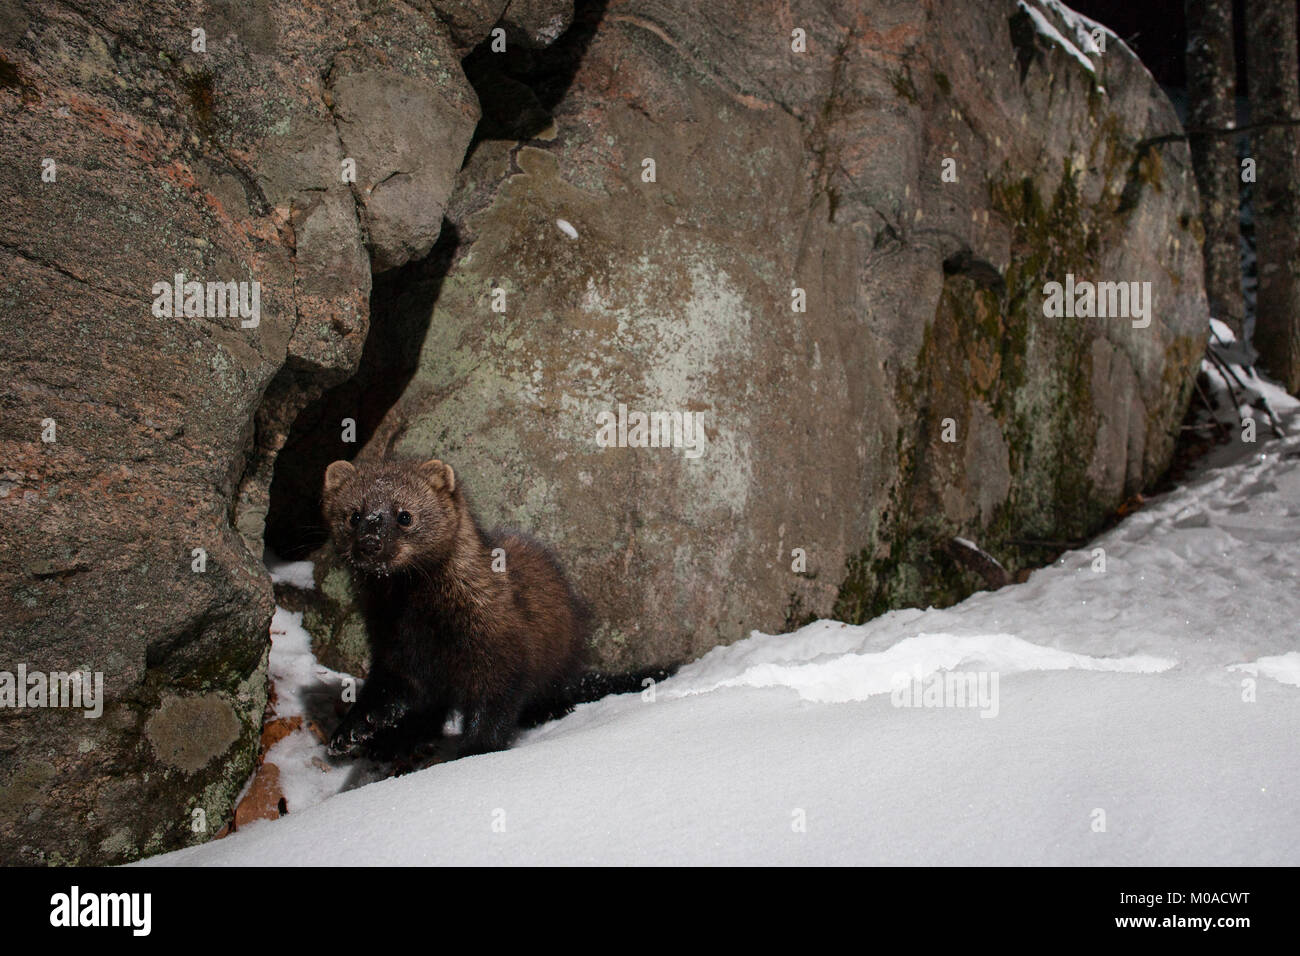 MAYNOOTH, HASTINGS HIGHLANDS, ONTARIO, CANADA - January 19, 2018: A fisher (Martes Pennanti), part of the Weasel family / Mustelidae forages for food. Stock Photo